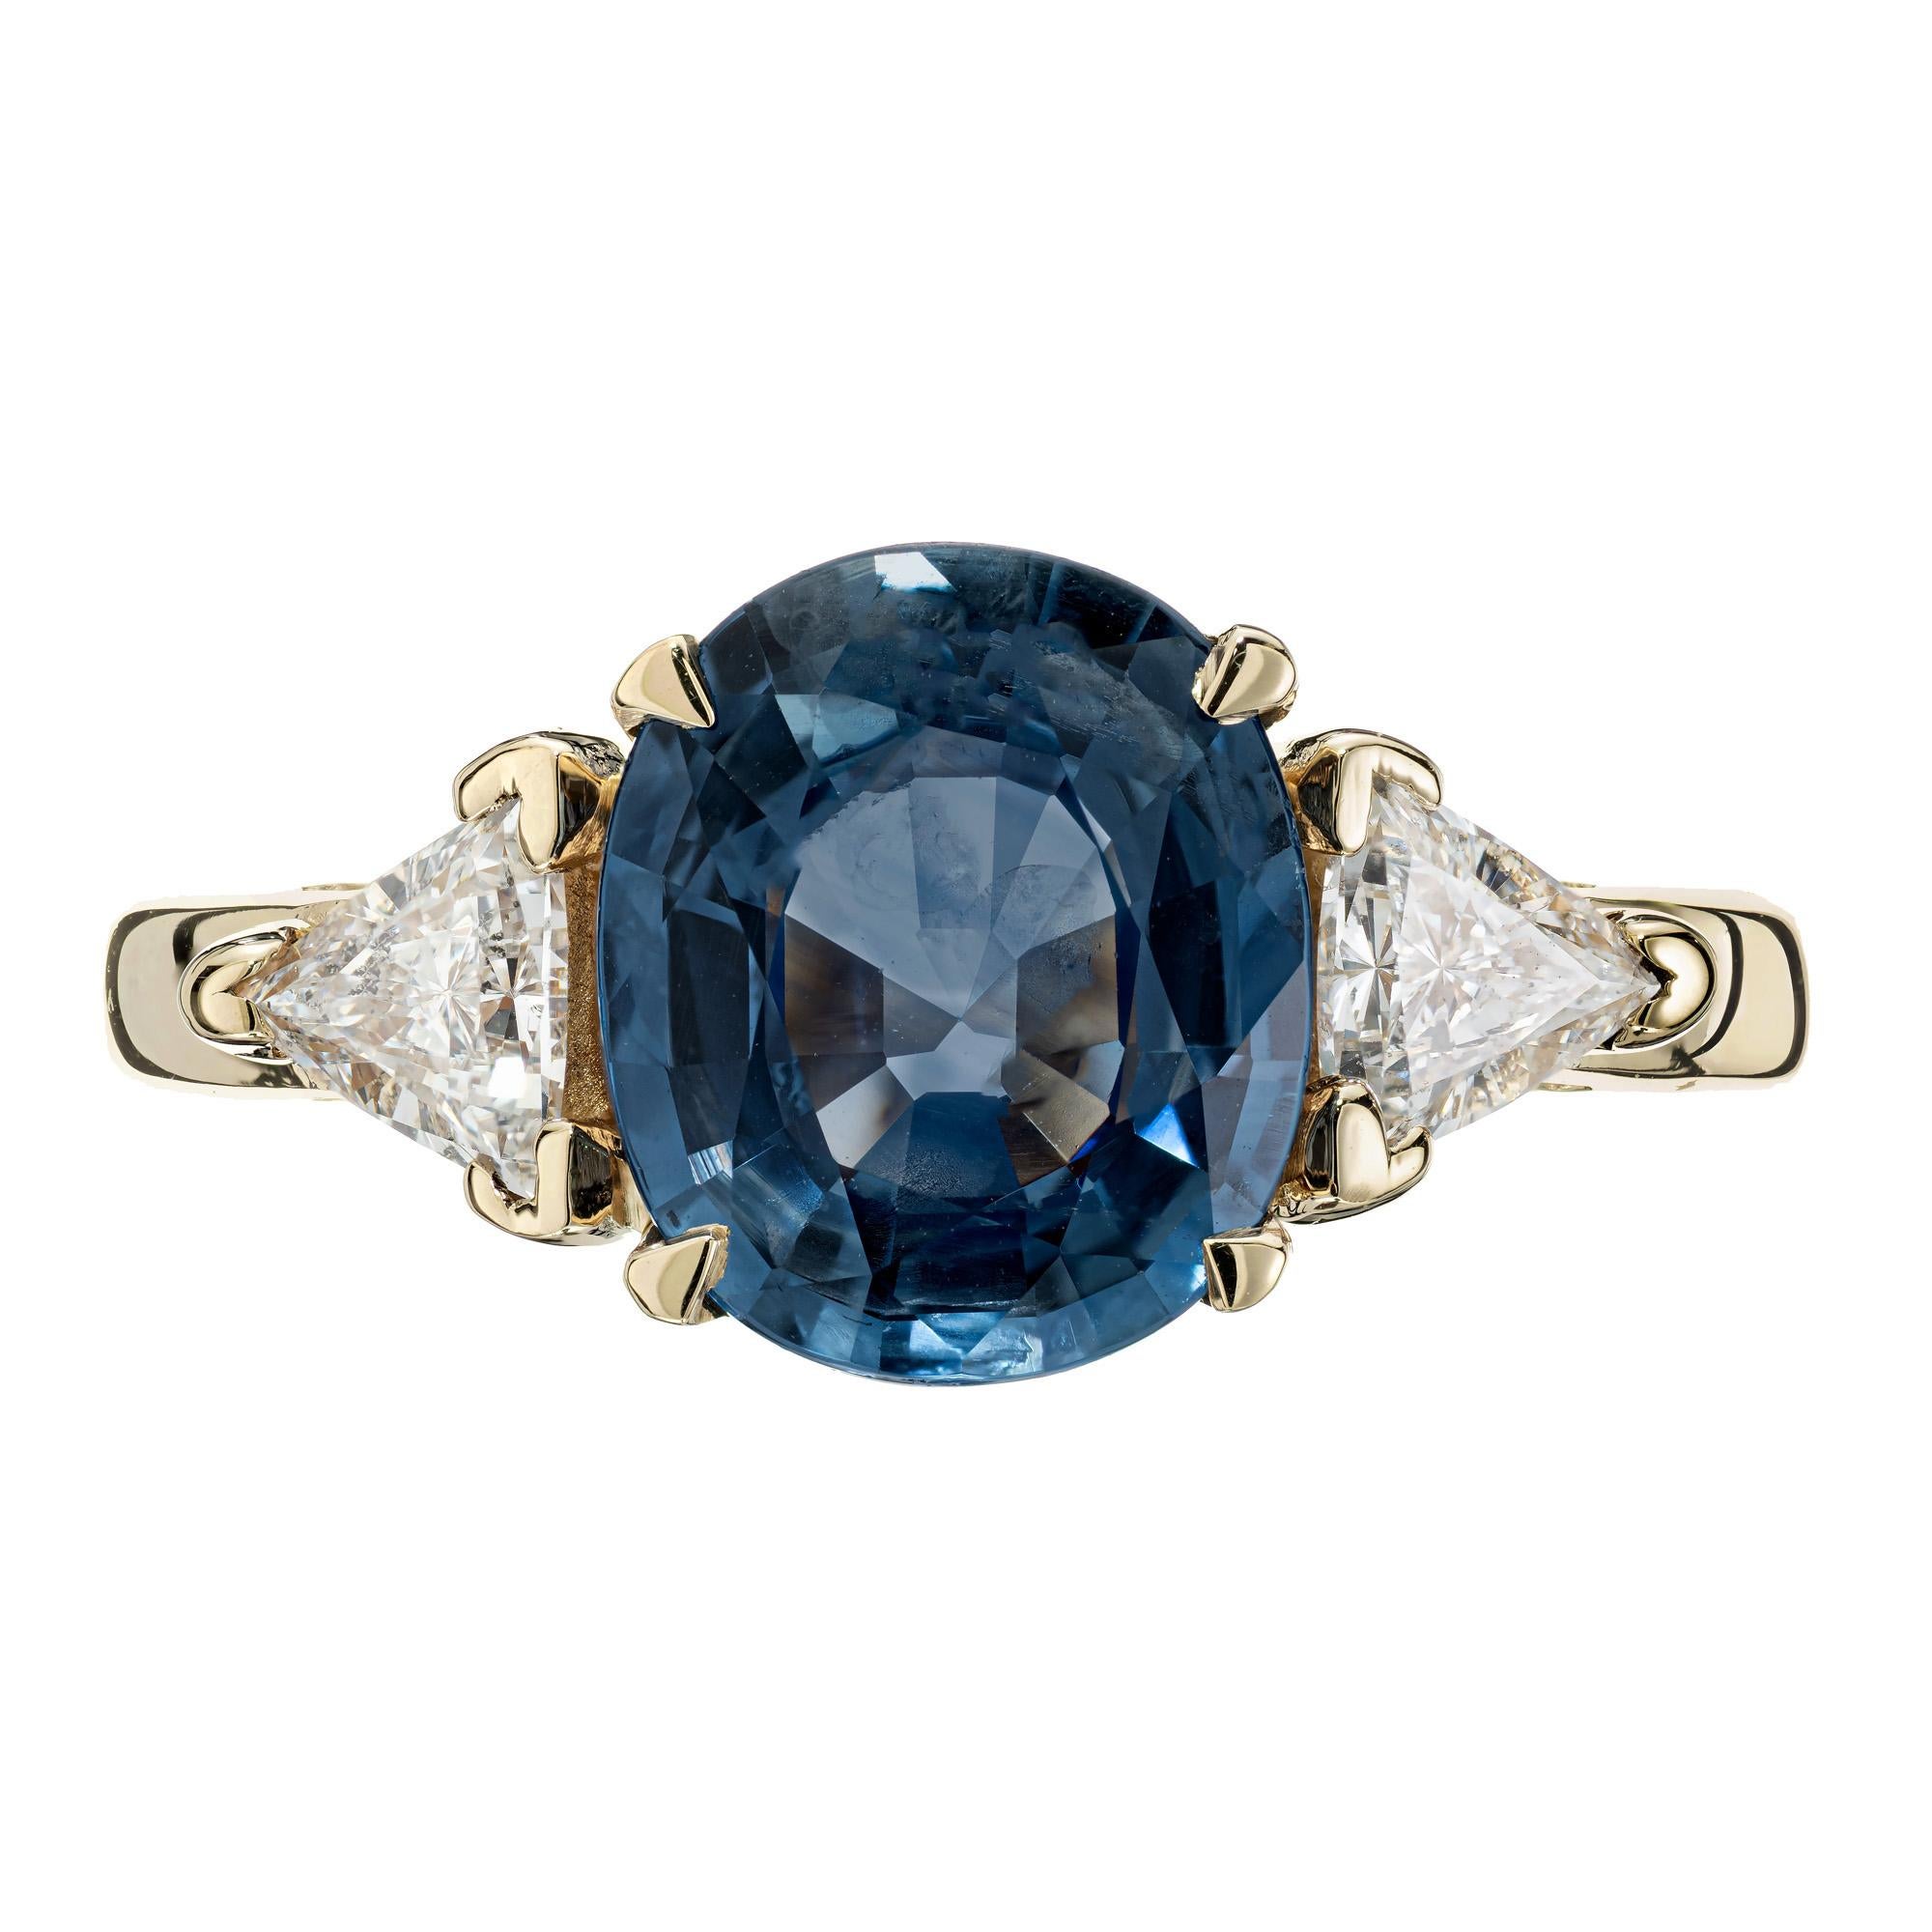 Natural Blue Oval Sapphire Diamond Three-Stone Gold engagement ring. GIA certified oval natural no heat sapphire center stone with 2 trilliant cut side diamonds in a 14k yellow setting. 

1 oval soft medium blue Sapphire, approx. total weight